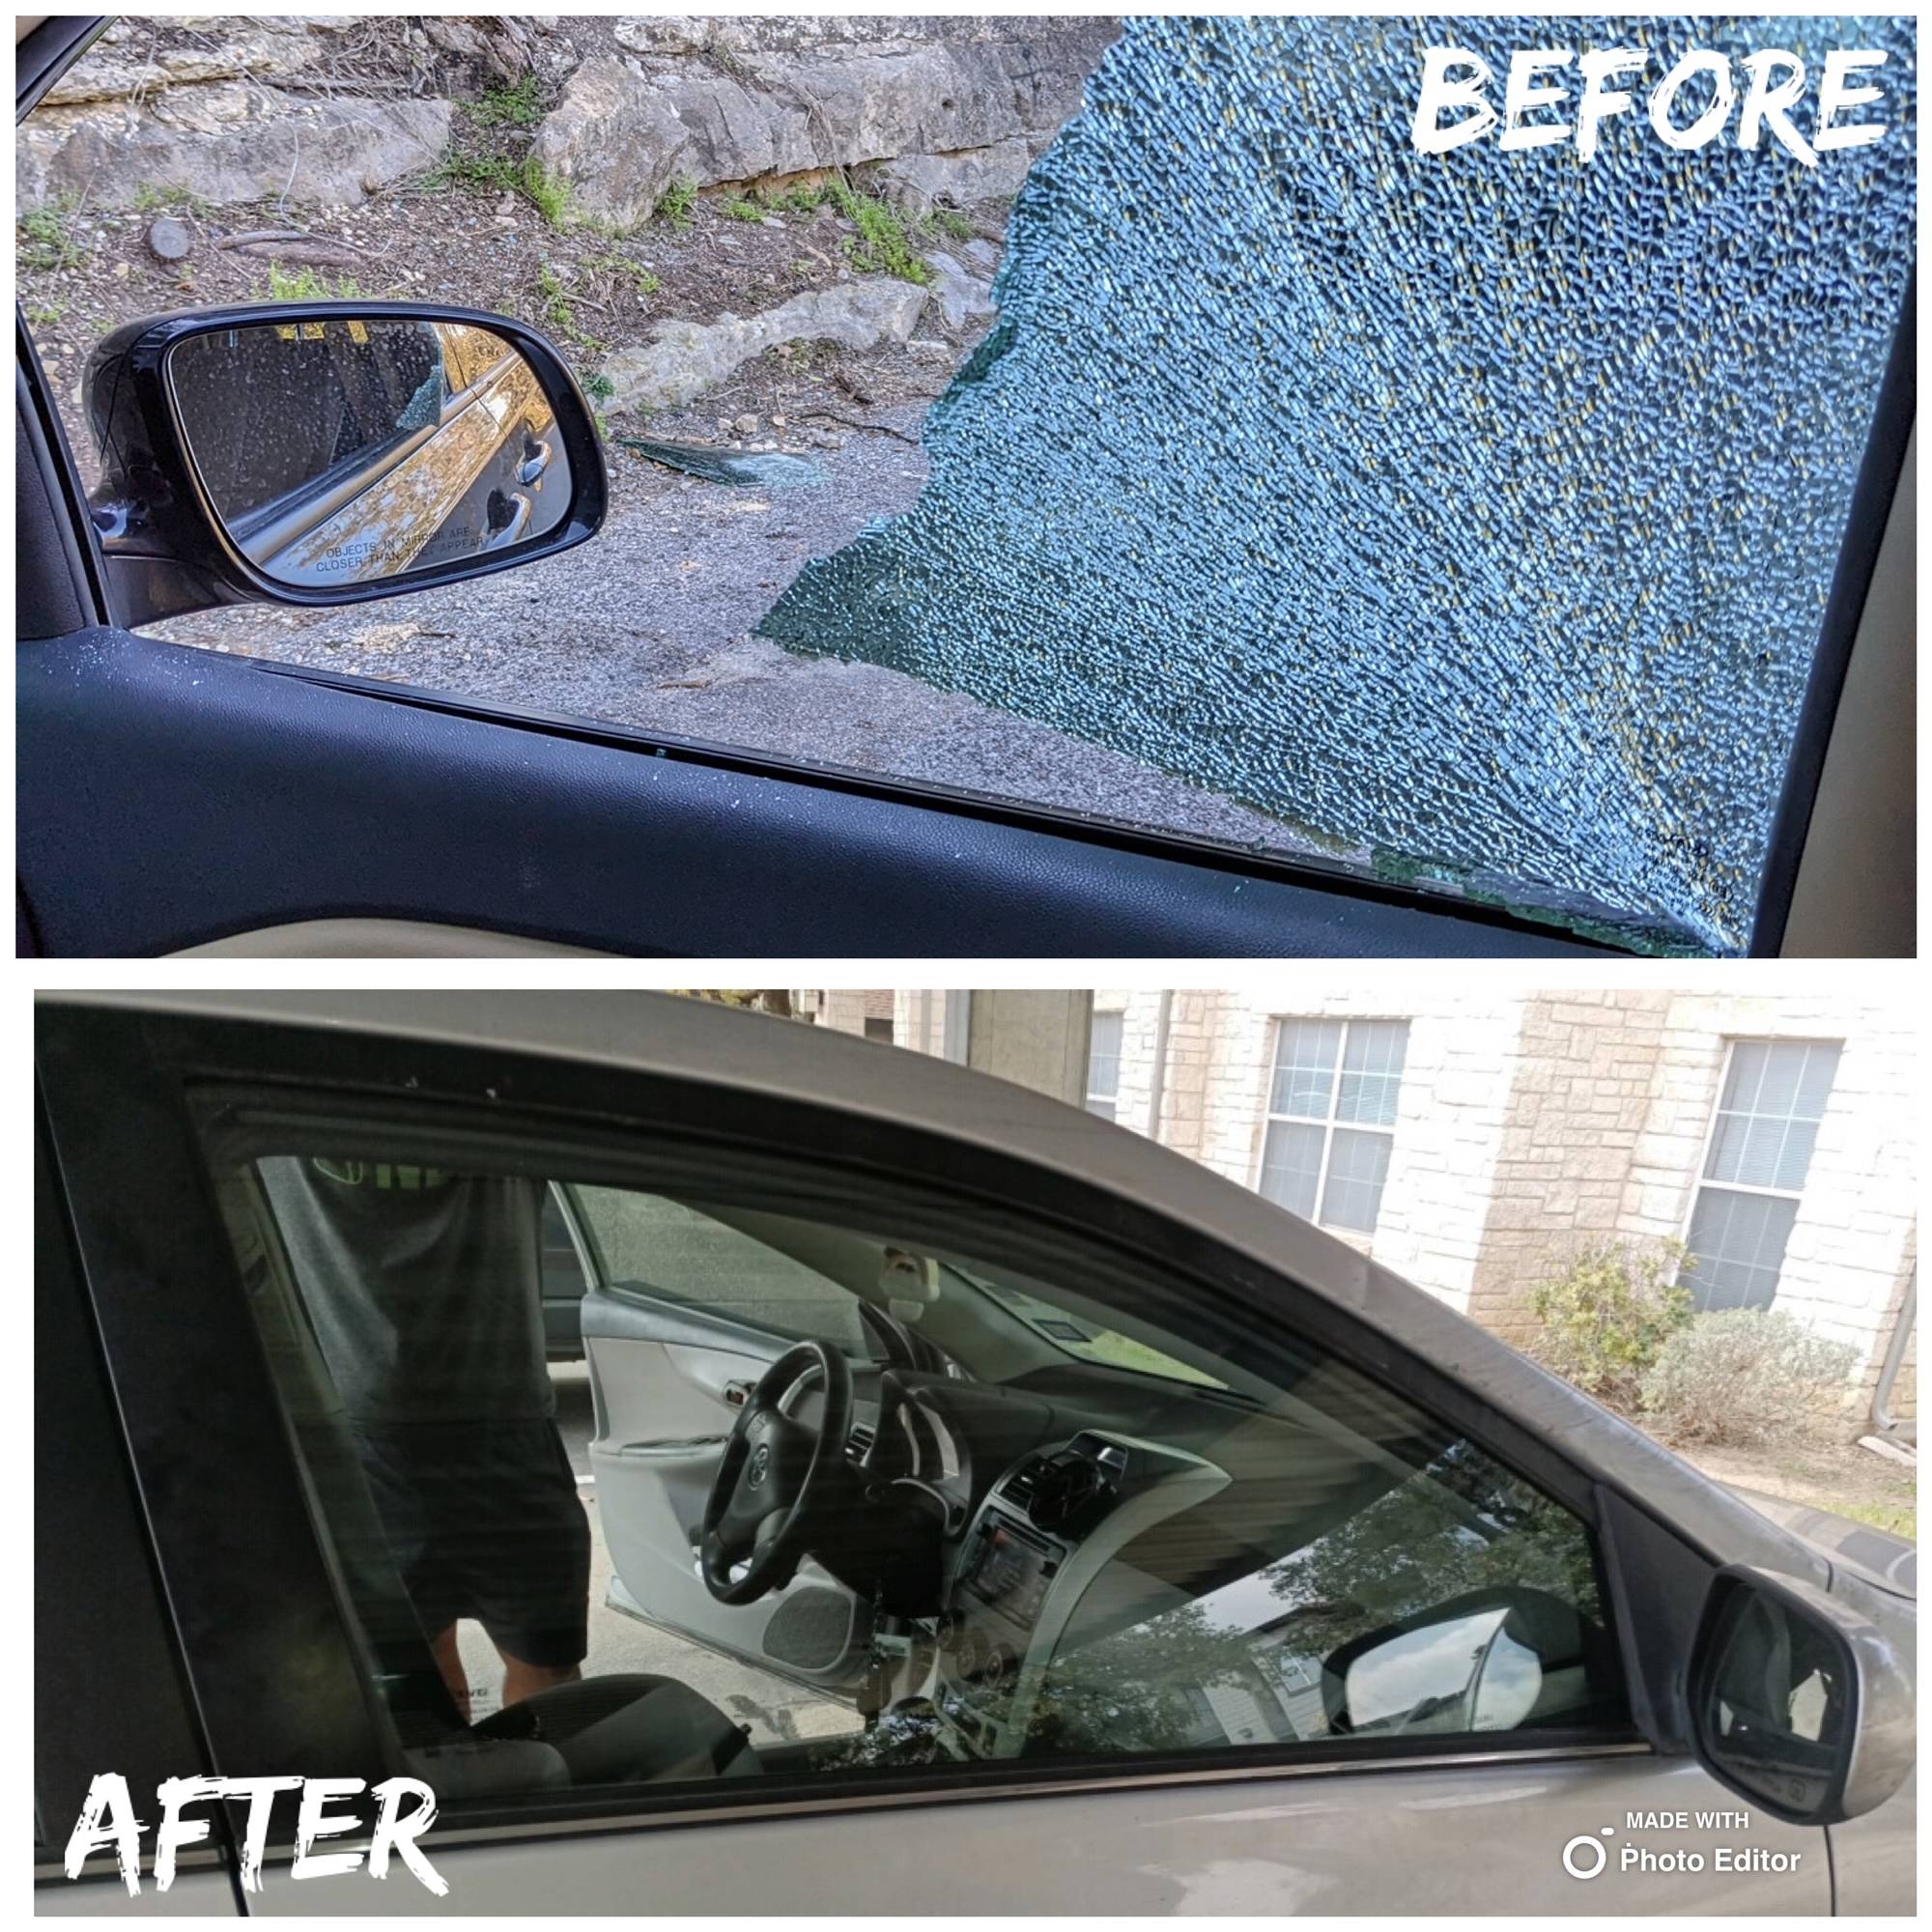 This image presents a before and after scenario of a sedan located in West San Antonio, Texas. The top half of the picture captures the immediate aftermath of an attempted burglary, demonstrating the severe damage done to the door glass - it's completely shattered, indicating a need for total replacement. The bottom half, in contrast, proudly shows the result of our home auto glass service's prompt and high-quality work, with the door glass expertly restored to pristine condition.